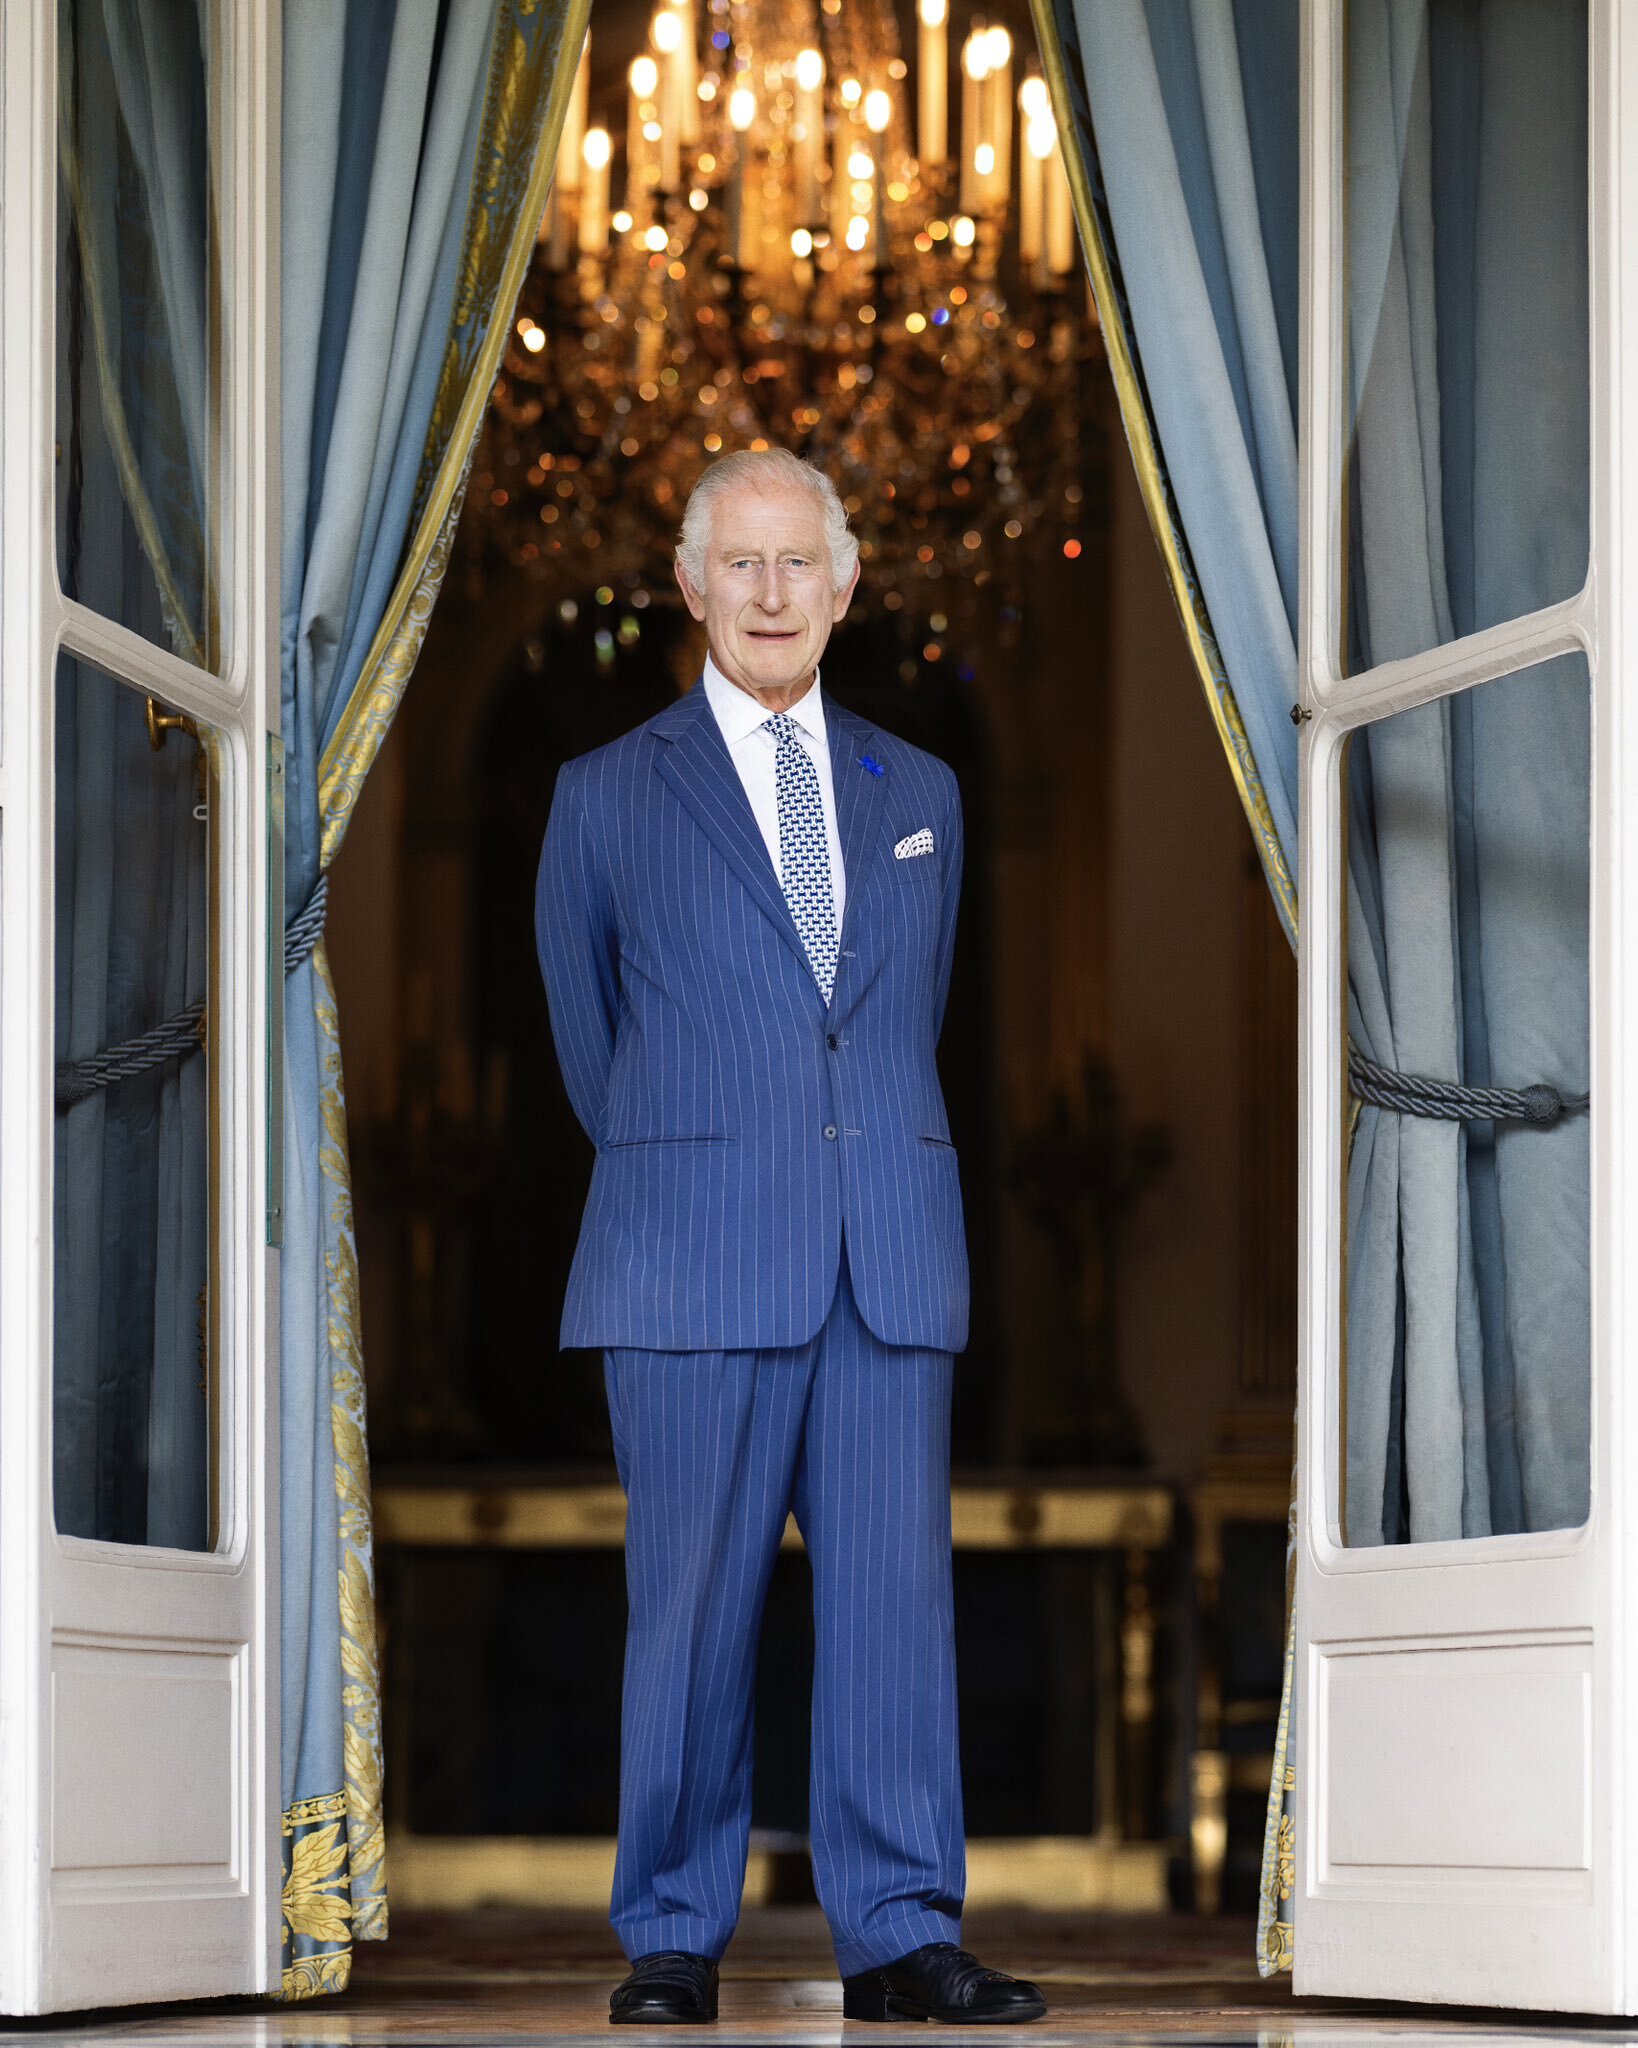 A previously unseen portrait of King Charles taken during a state visit to France last year.